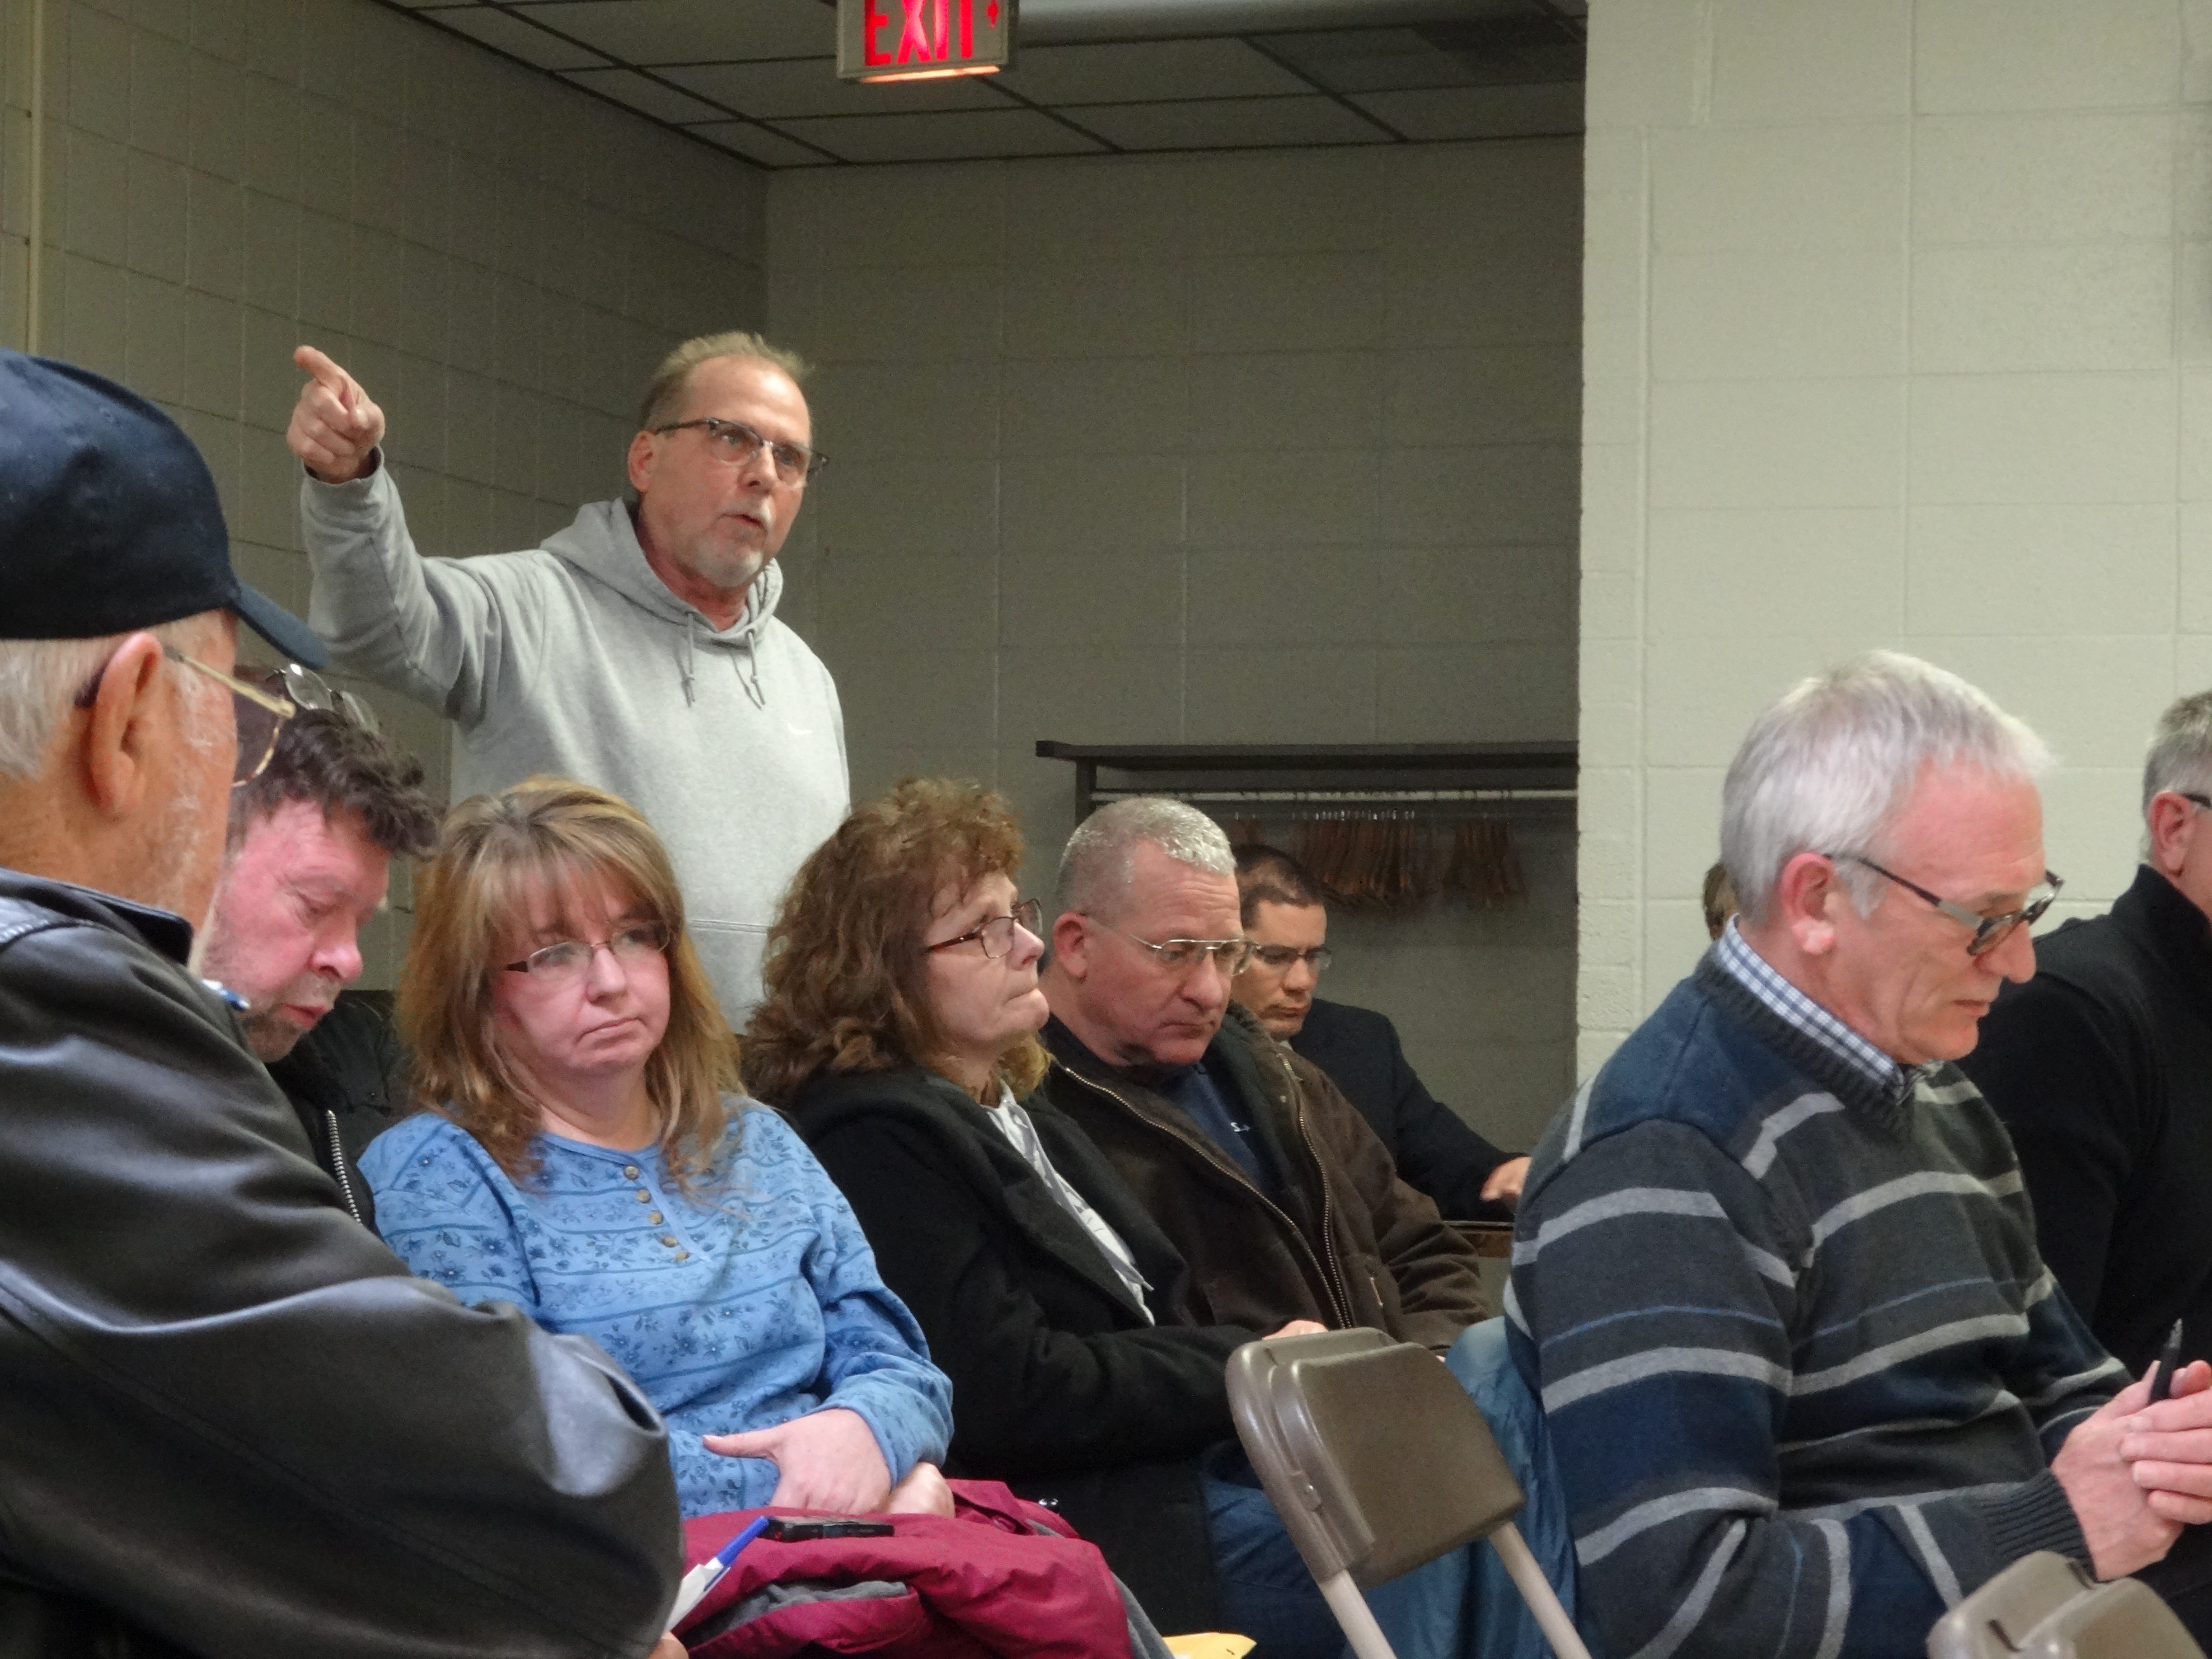 David Purich of Bedford Road speaks against a sanitary sewer extension project in his neighborhood.